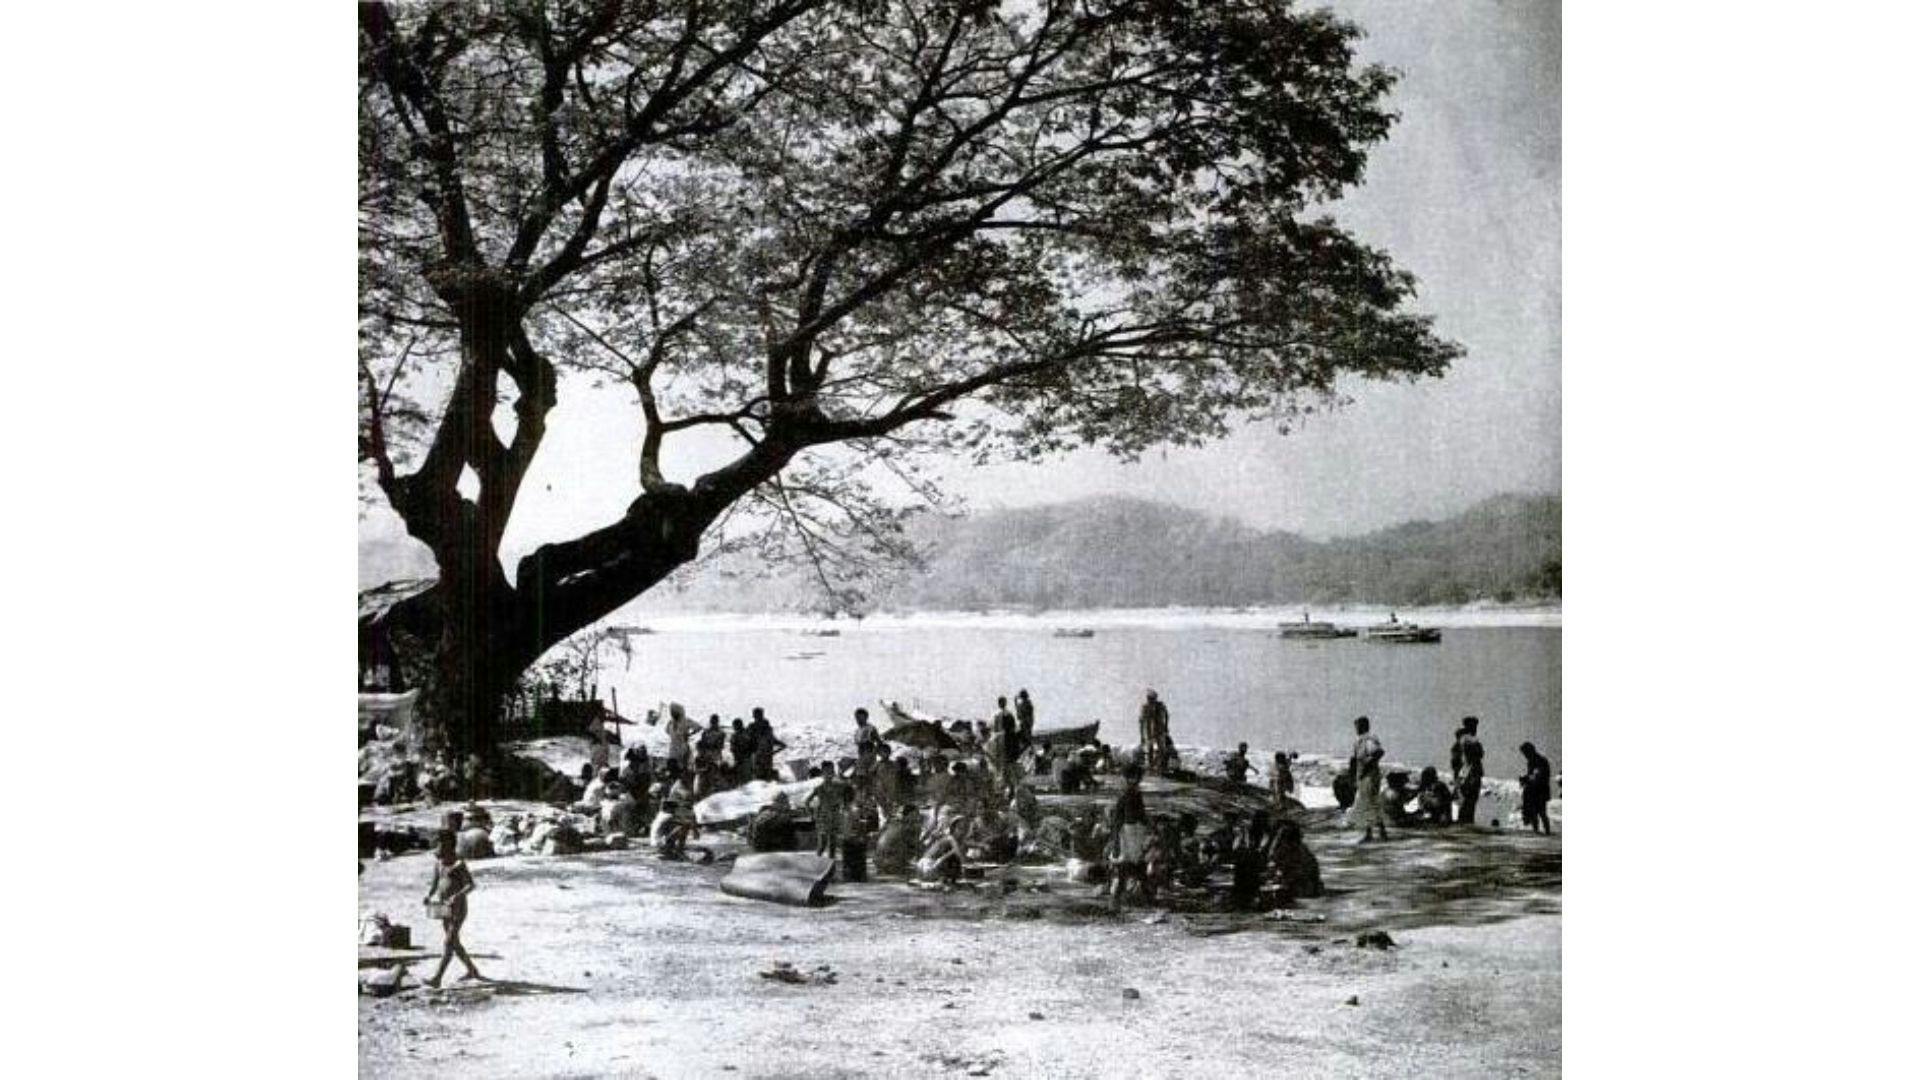 Indian refugees waiting to cross the Irrawaddy River | Wikimedia Commons